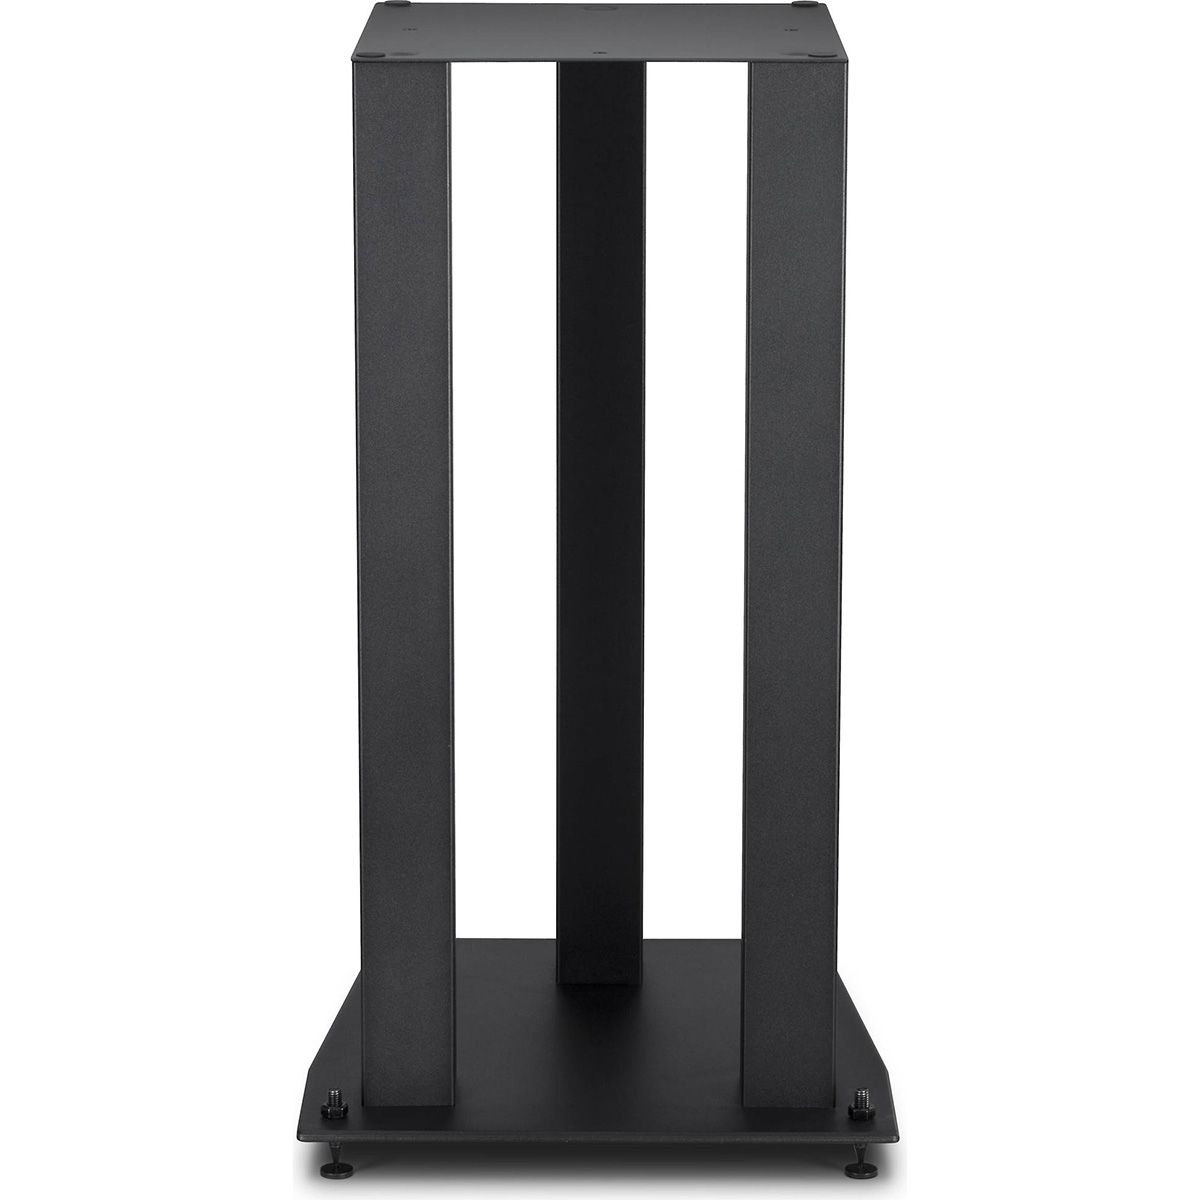 SourcePoint 8 Speakers Stands Front View